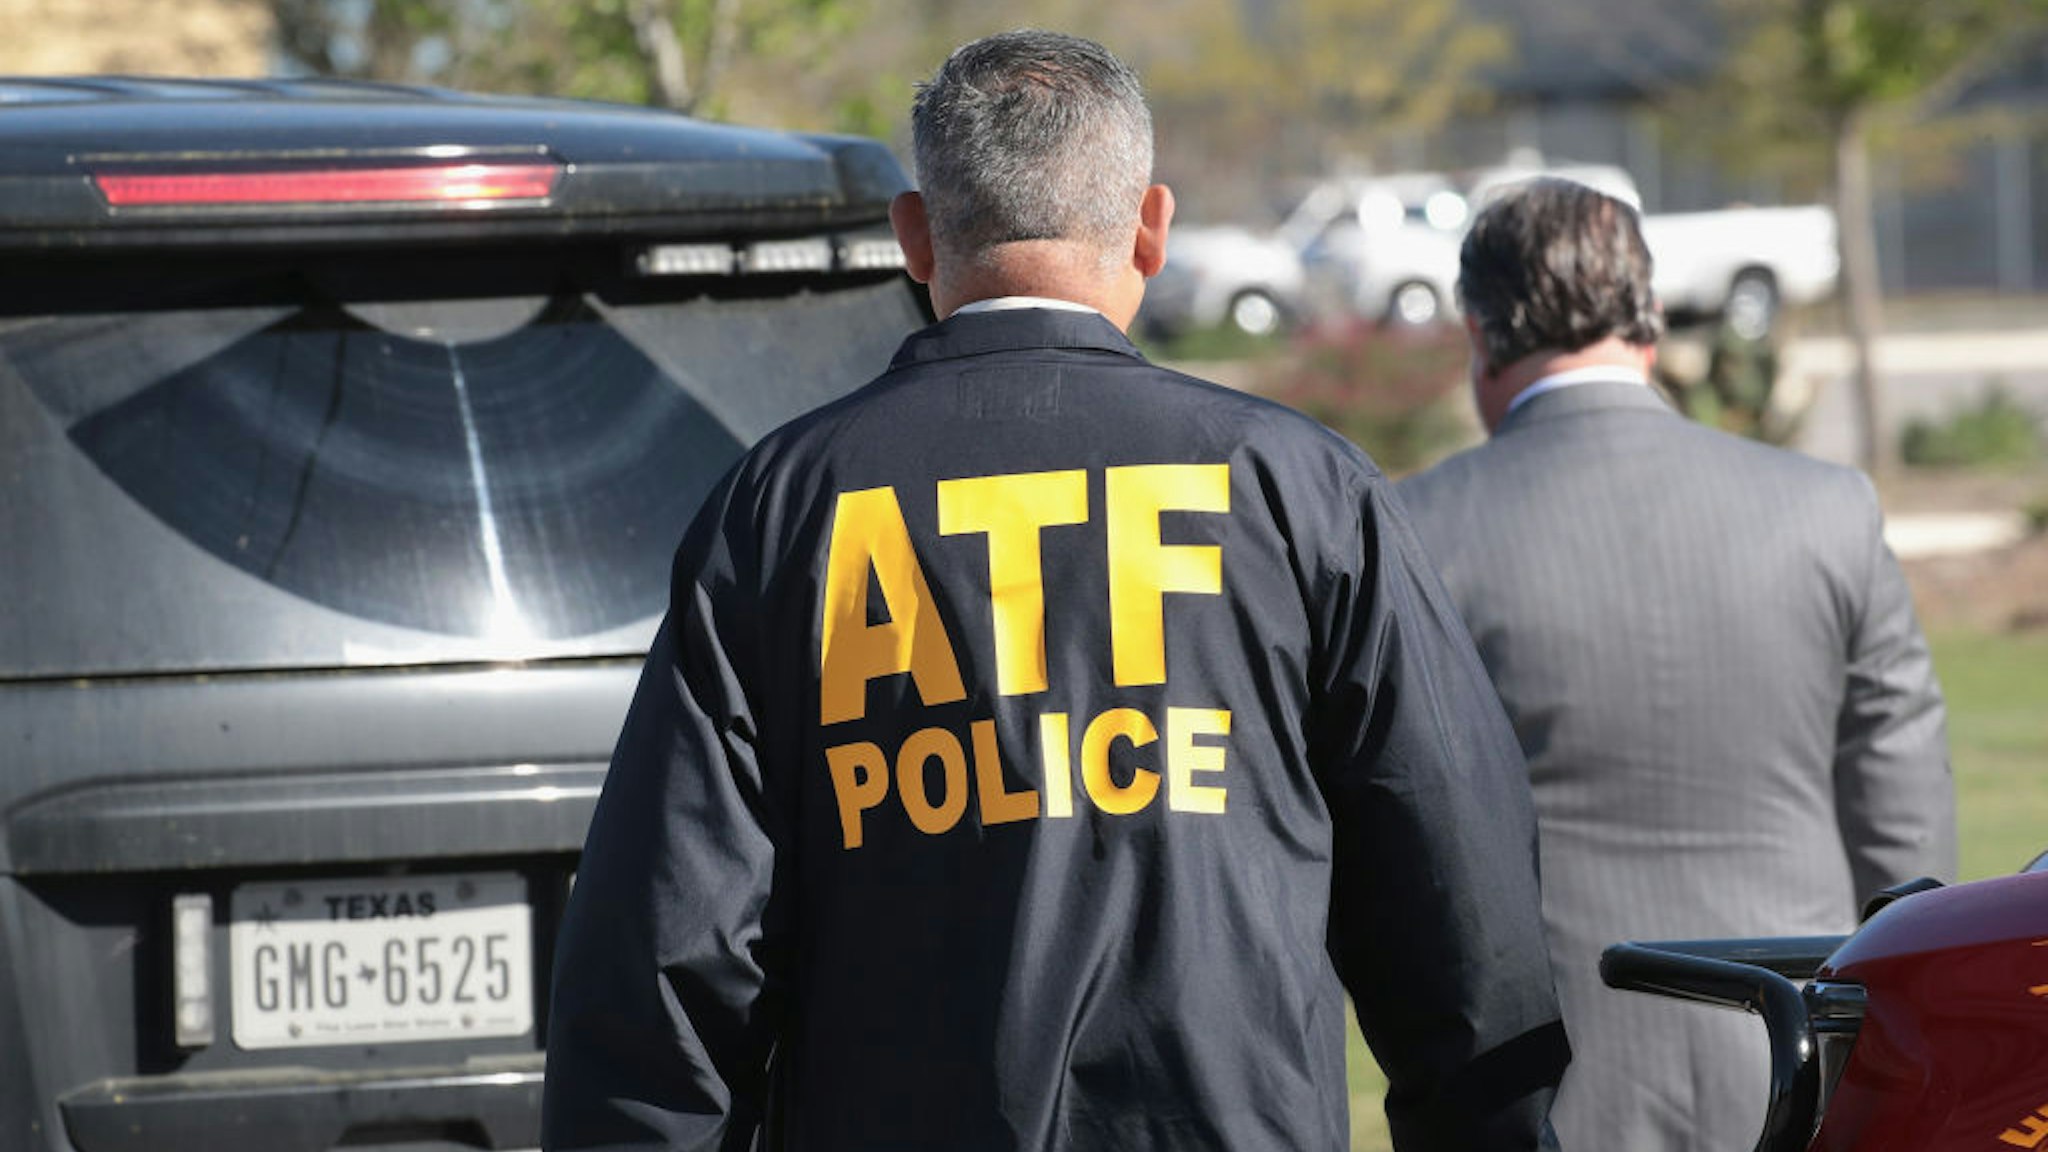 SCHERTZ, TX - MARCH 20: ATF agents continue their investigation at a FedEx facility following an explosion on March 20, 2018 in Schertz, Texas. A package exploded while being transported on a conveyor shortly after midnight this morning causing minor injuries to one person. The explosion is believed to be related to several recent package bombs that have been detonated in Austin, Texas, about an hour's drive from Schertz. (Photo by Scott Olson/Getty Images)